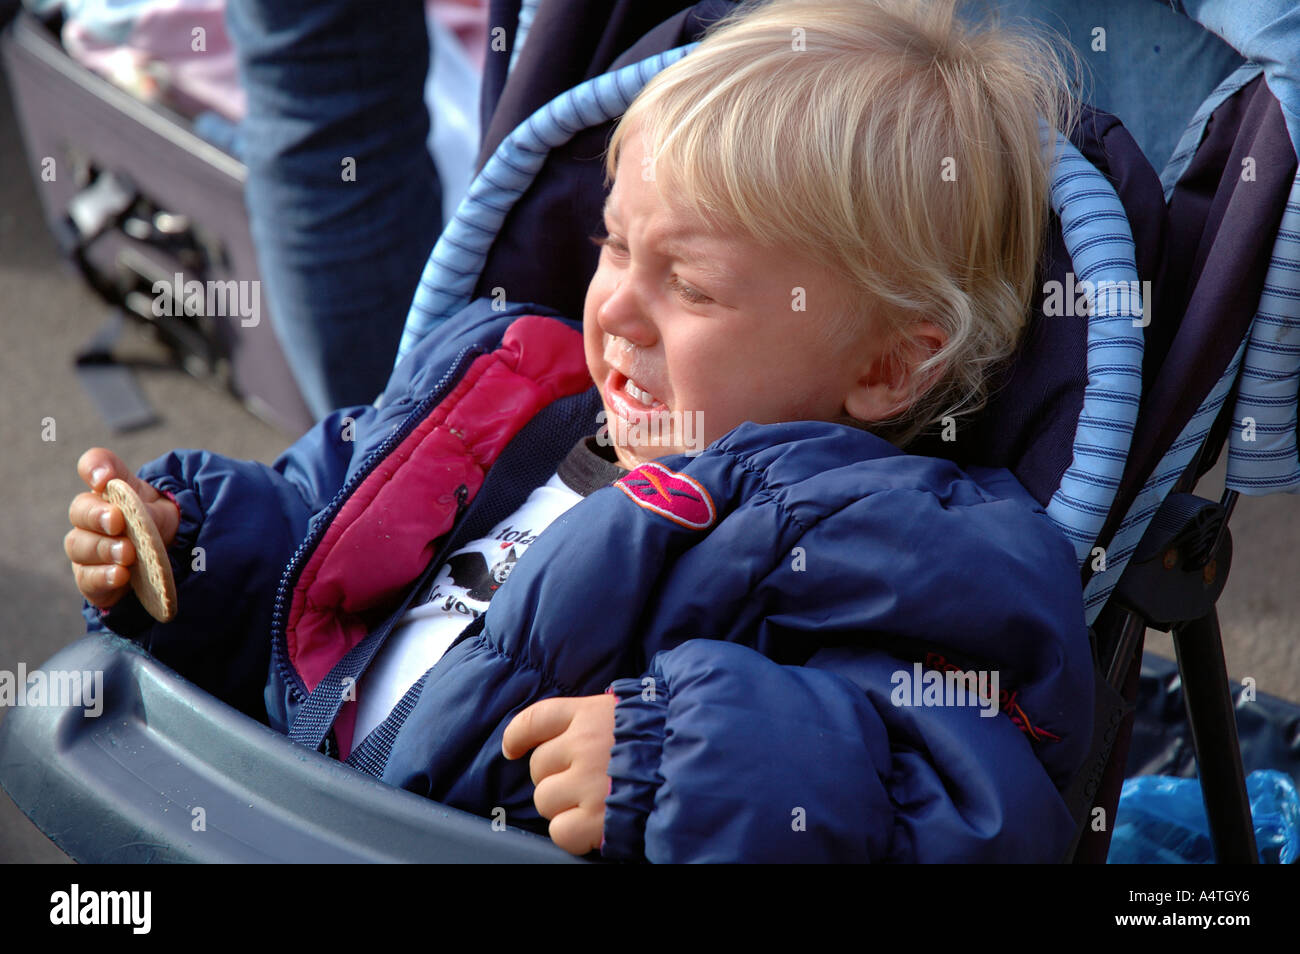 Child in tears in a pushchair. Stock Photo